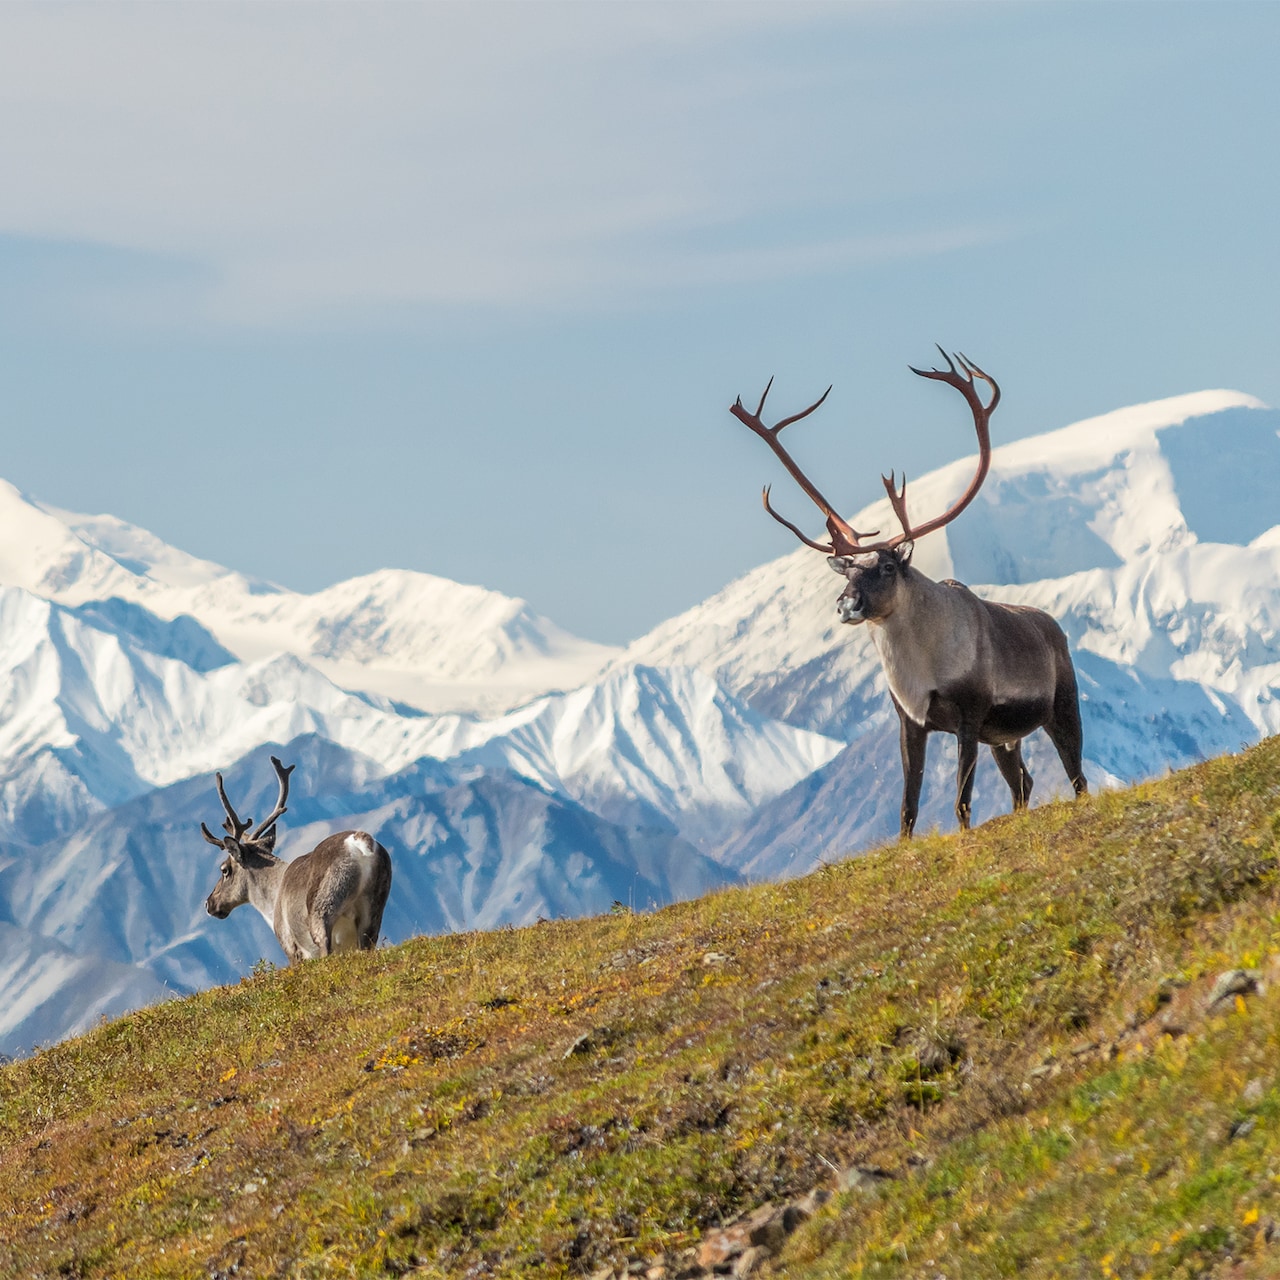 Two Alaskan caribou stand on a grassy hill near a snow-capped mountain range